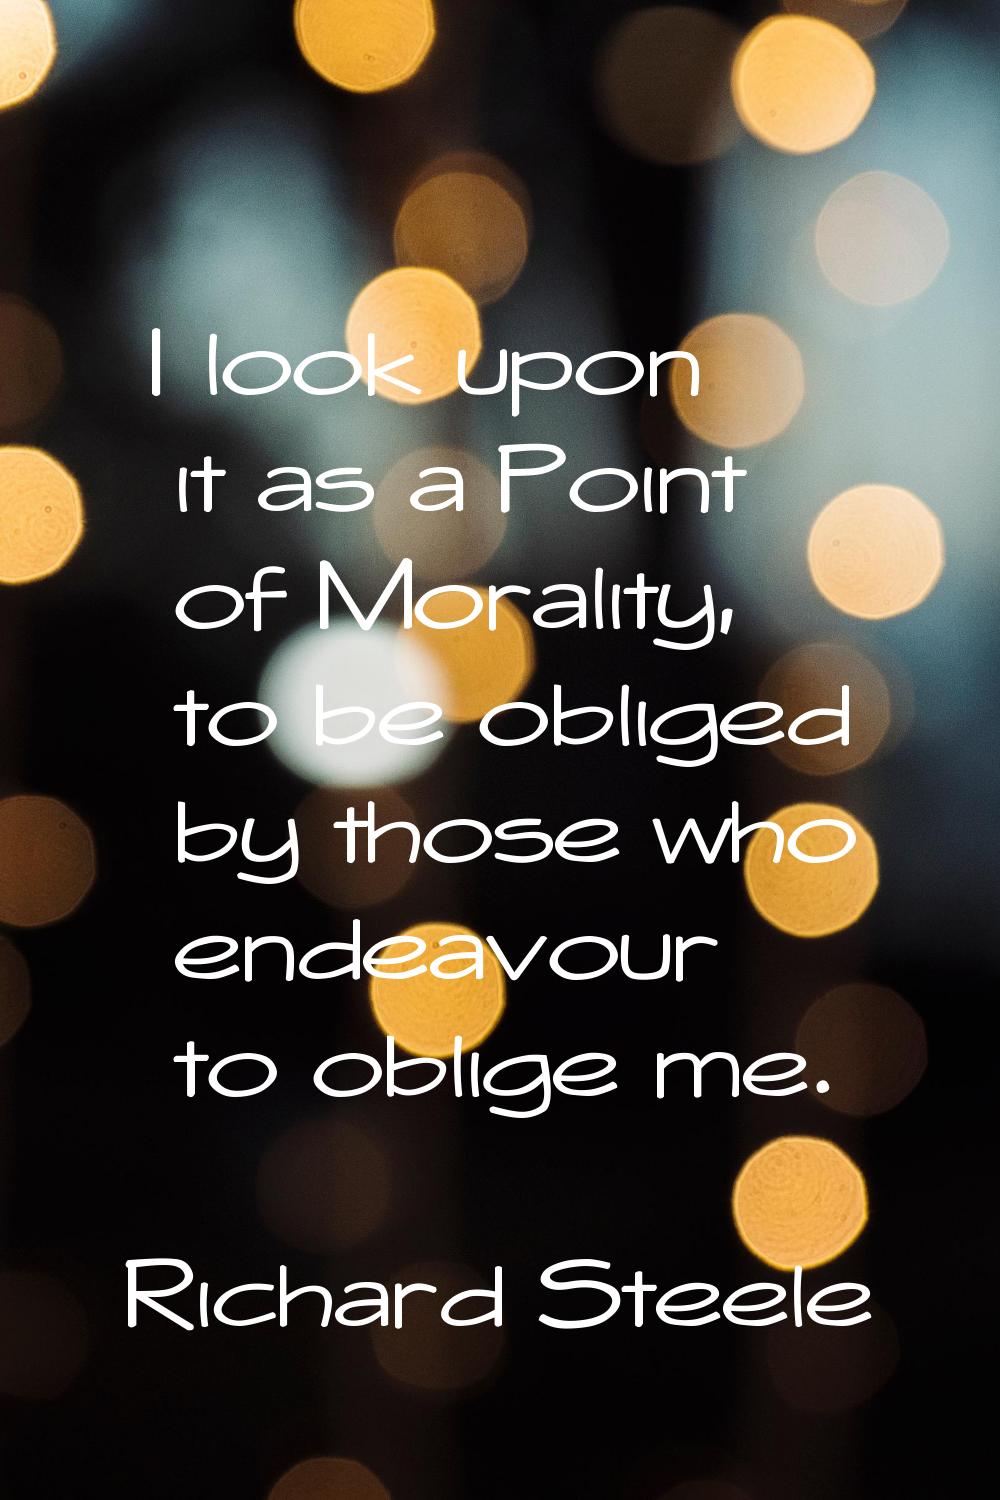 I look upon it as a Point of Morality, to be obliged by those who endeavour to oblige me.